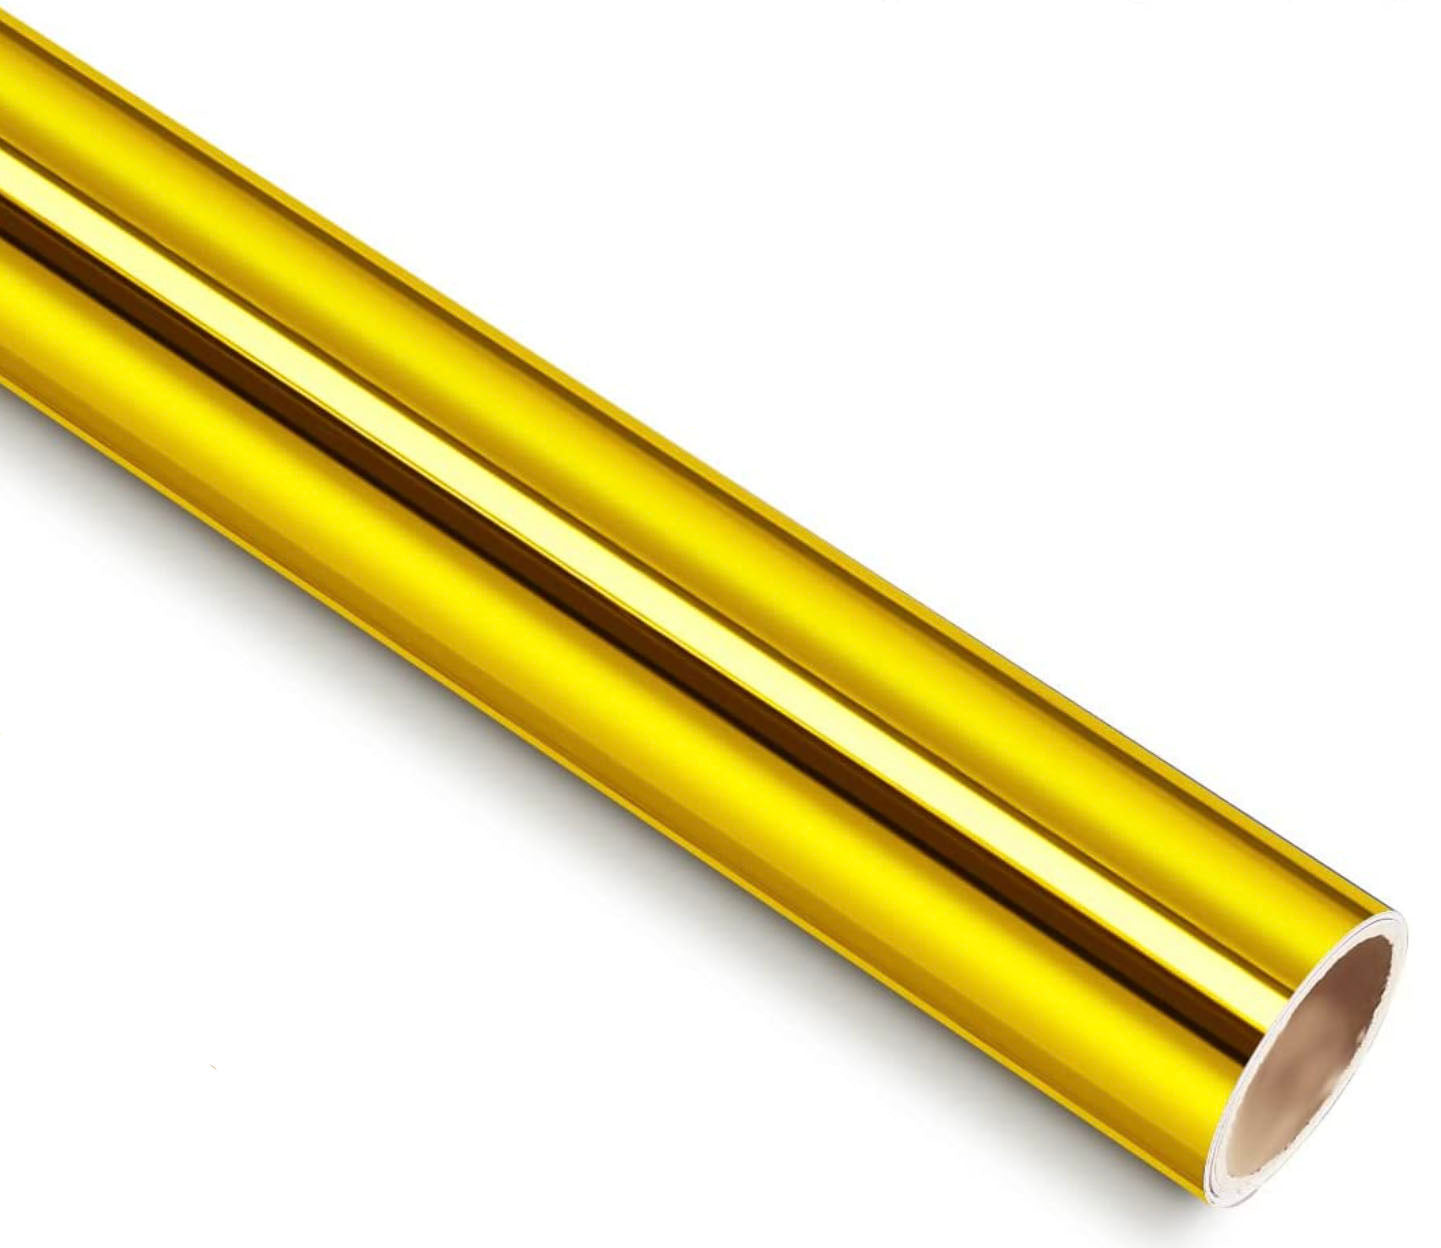  24 x 50 ft Roll of Gold(Chrome Mirror) Repositionable